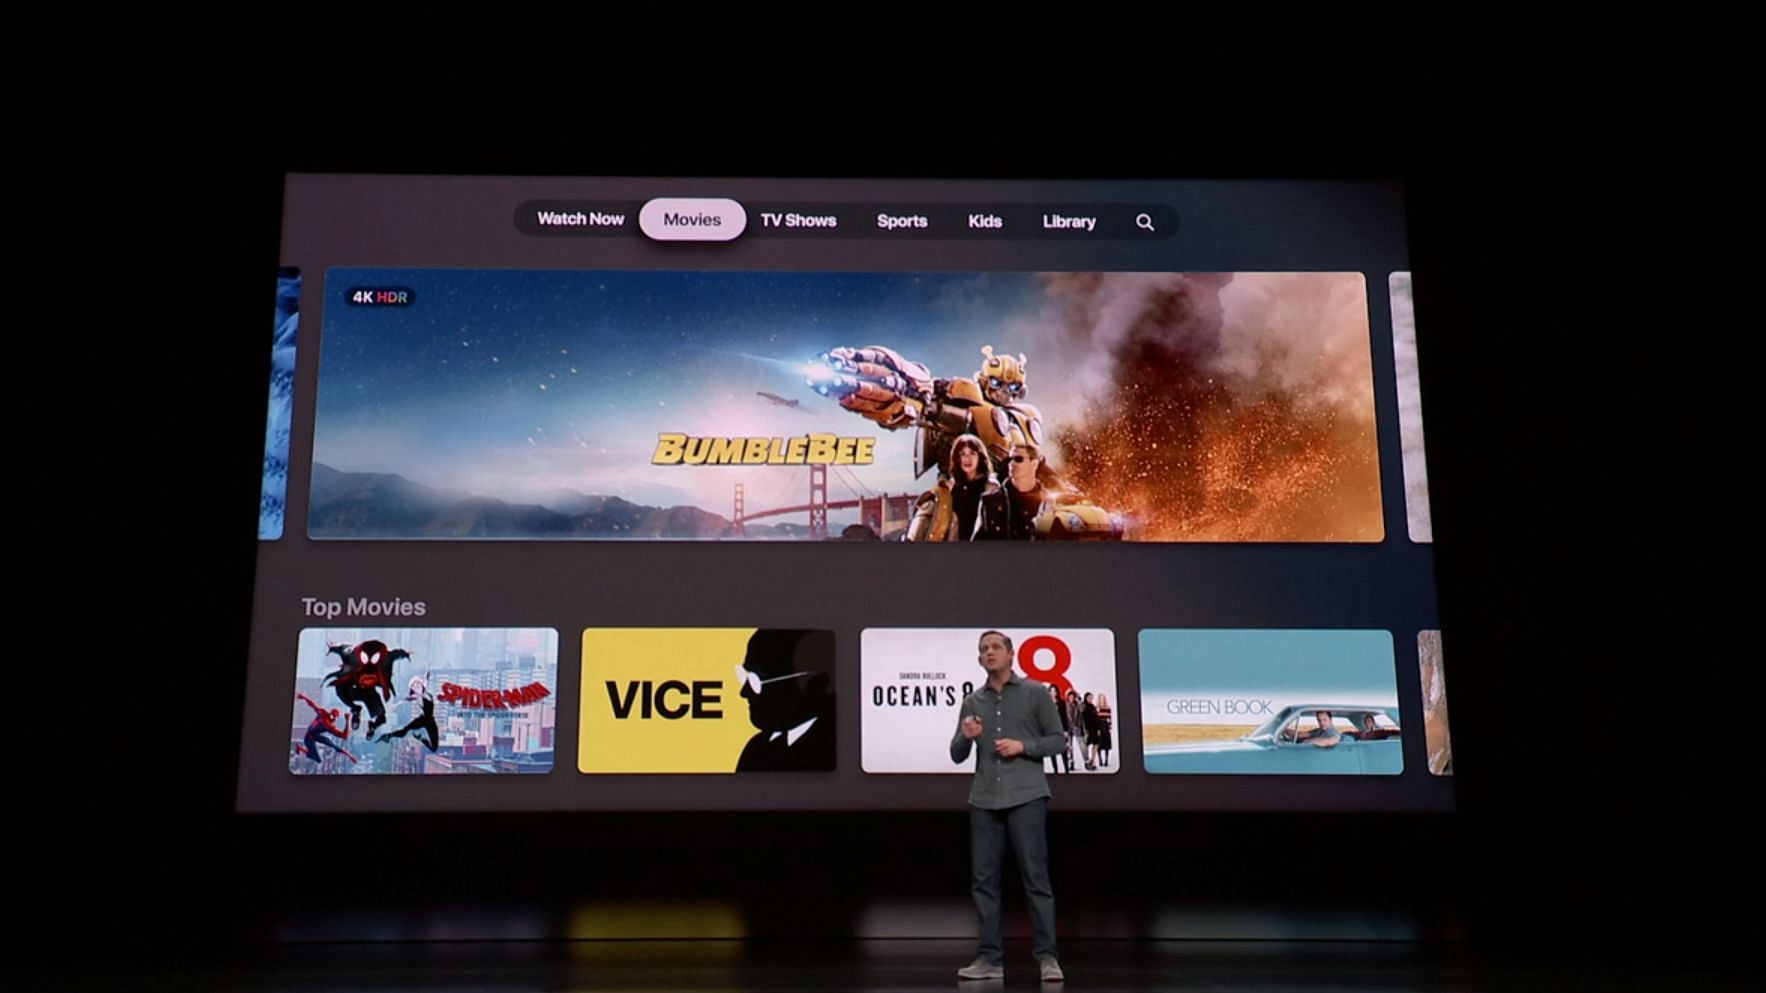 The Apple TV app now has a redesigned interface.